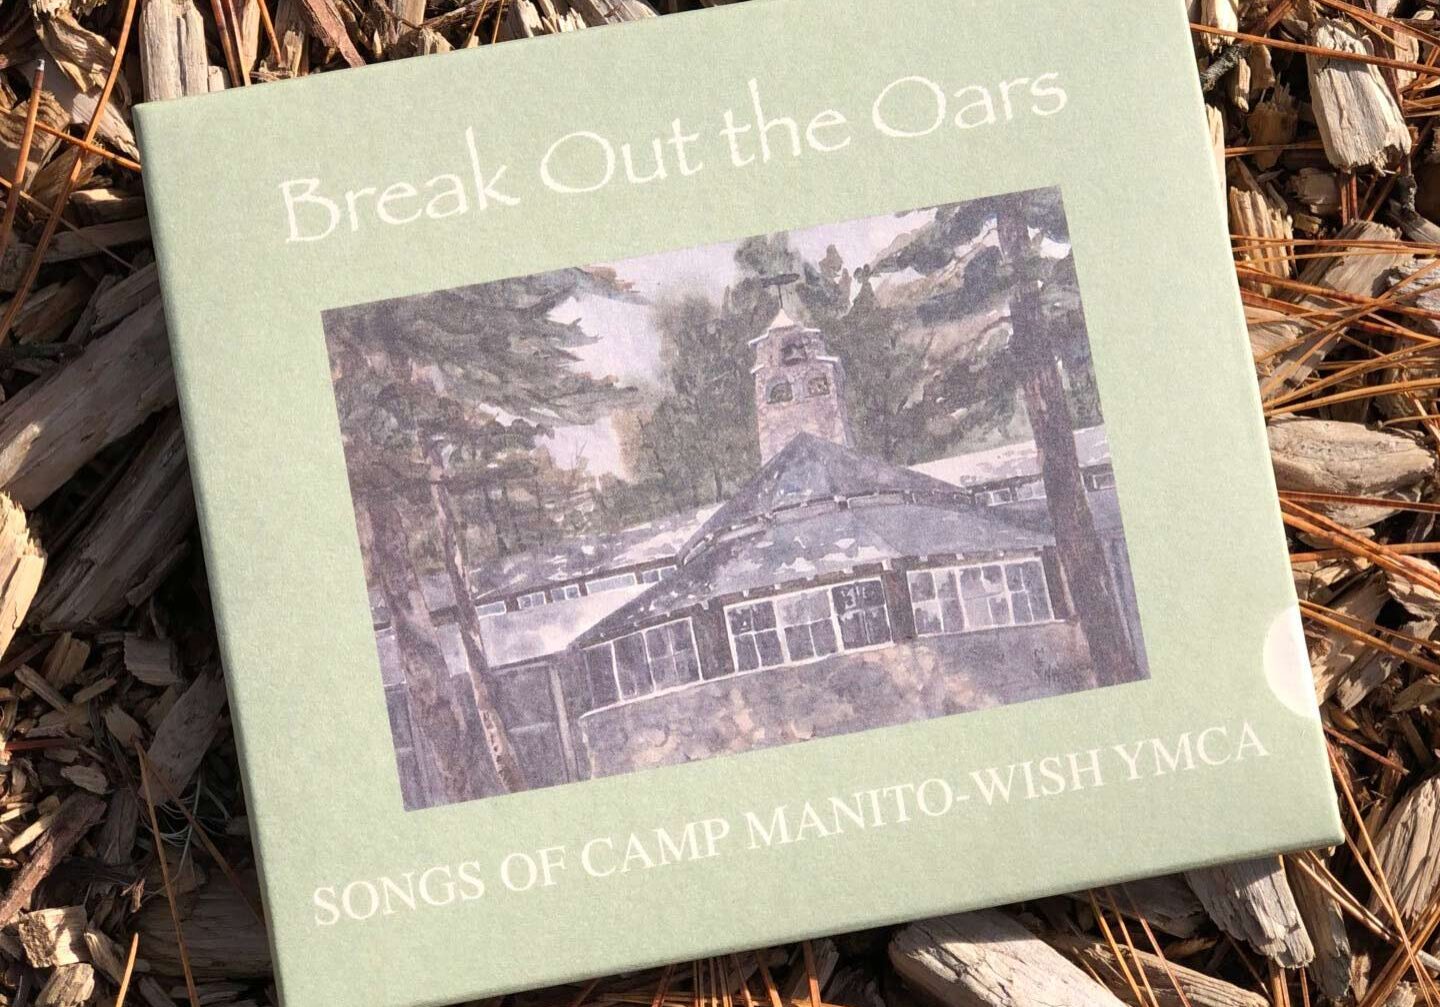 Break Out the Oars/ Songs of Camp Manito-wish YMCA